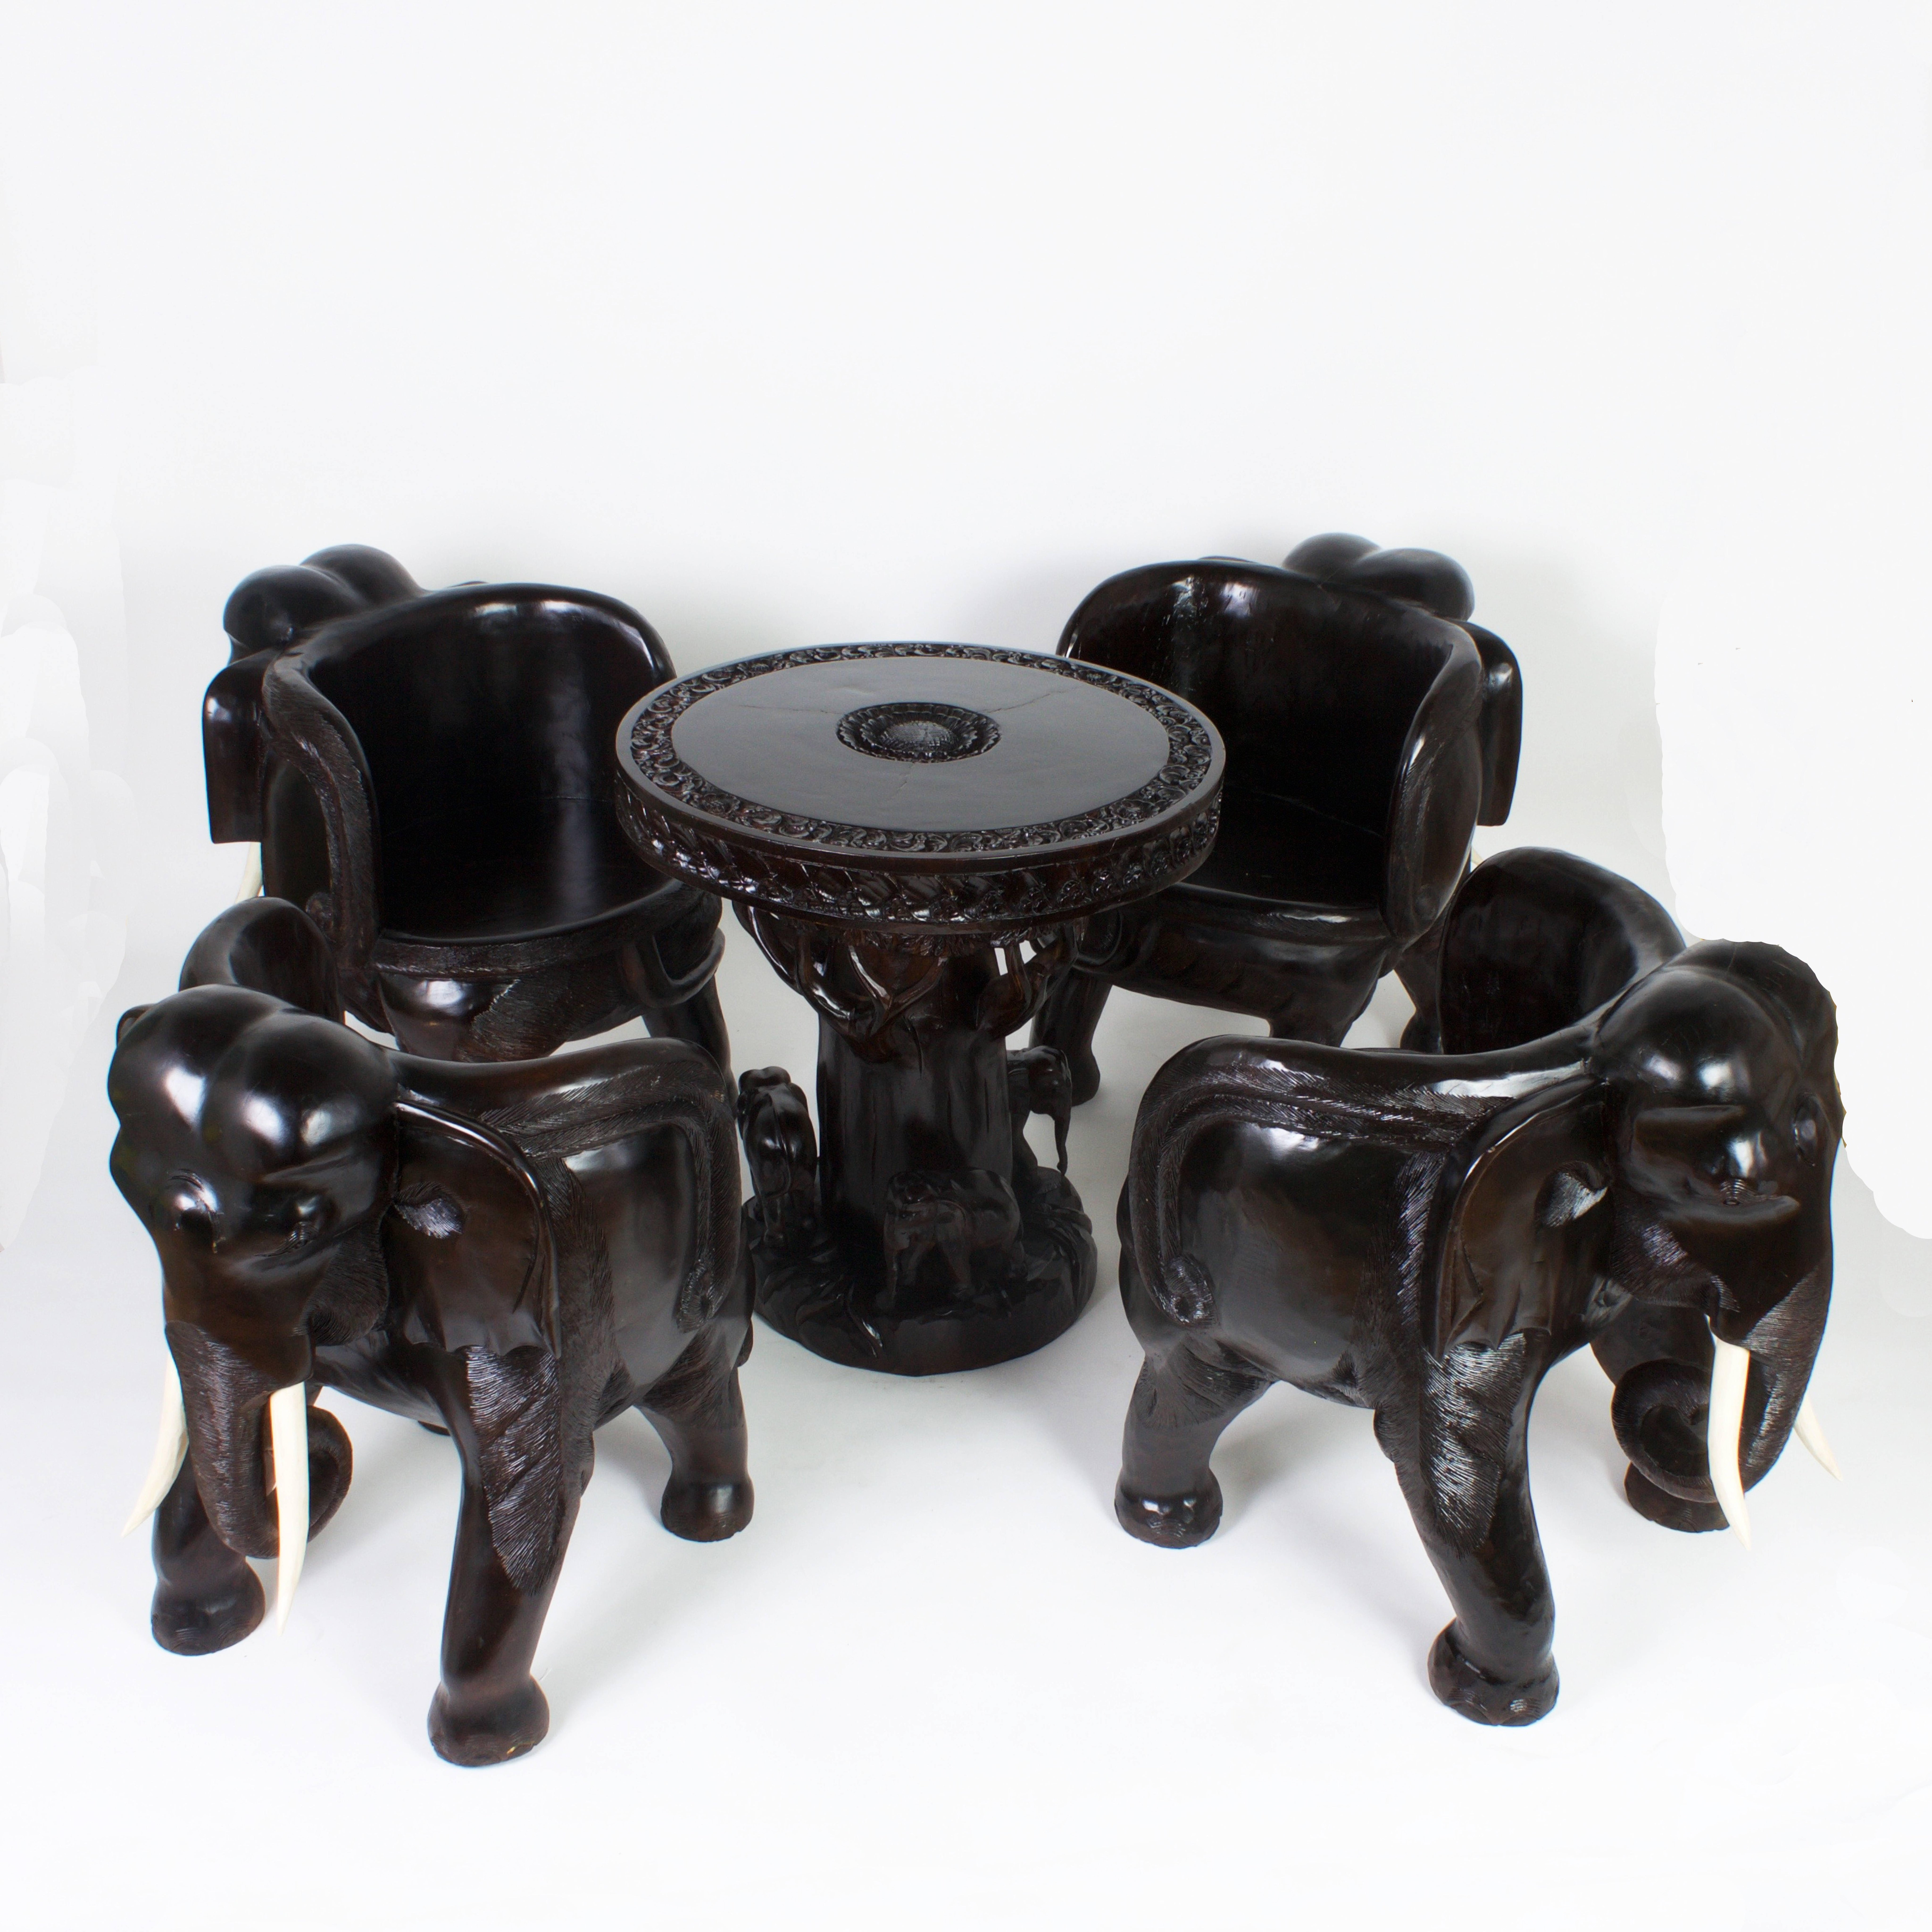 Here is an unusual and extravagant Anglo Indian style set of 4 chairs and a table, carved in Thailand.  The chairs are elephants expertly carved of ironwood. The table base is whimsically carved to a tree of life with 3 miniature elephants around